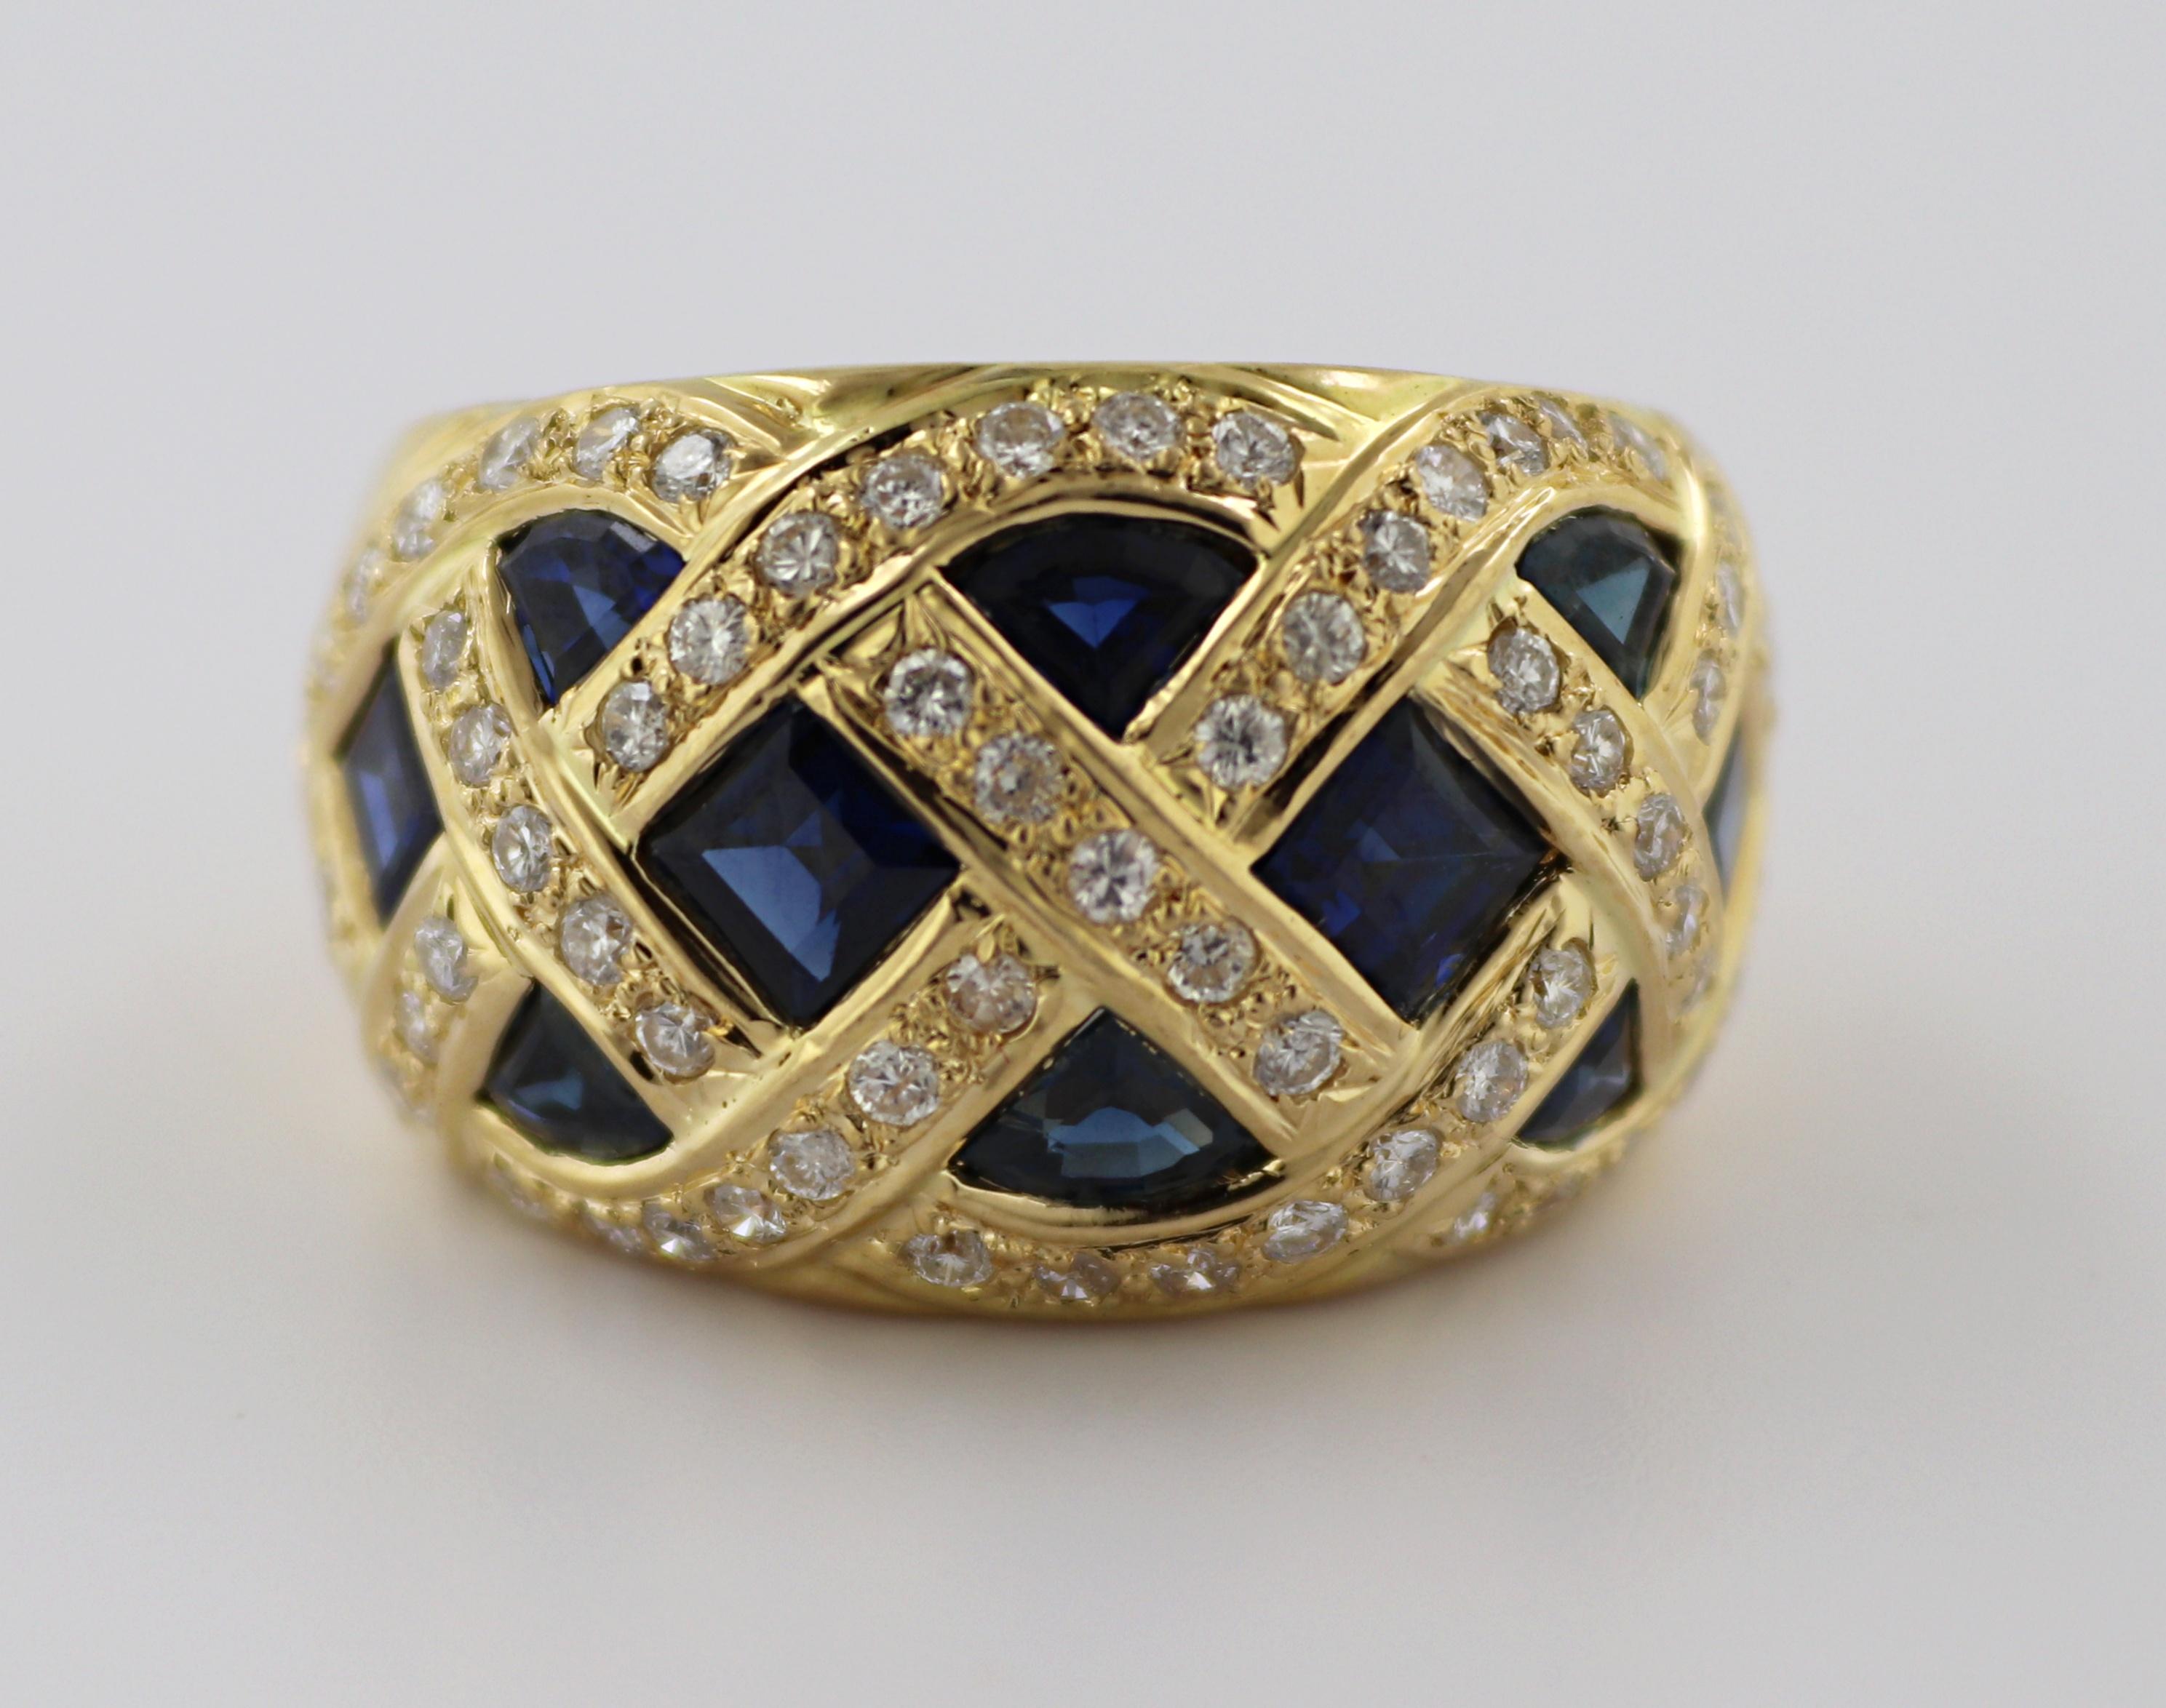 Featuring (10) calibre-cut sapphires, 3.41 cts. tw., accented by (66) full-cut diamonds, 0.88 ct. tw., SI-I, I-
J, set in an 18k yellow gold basket weave style mounting, tapering from 15.2 mm to 7.2 mm, size 8.5,
marked S341, D088, 18K Gross weight